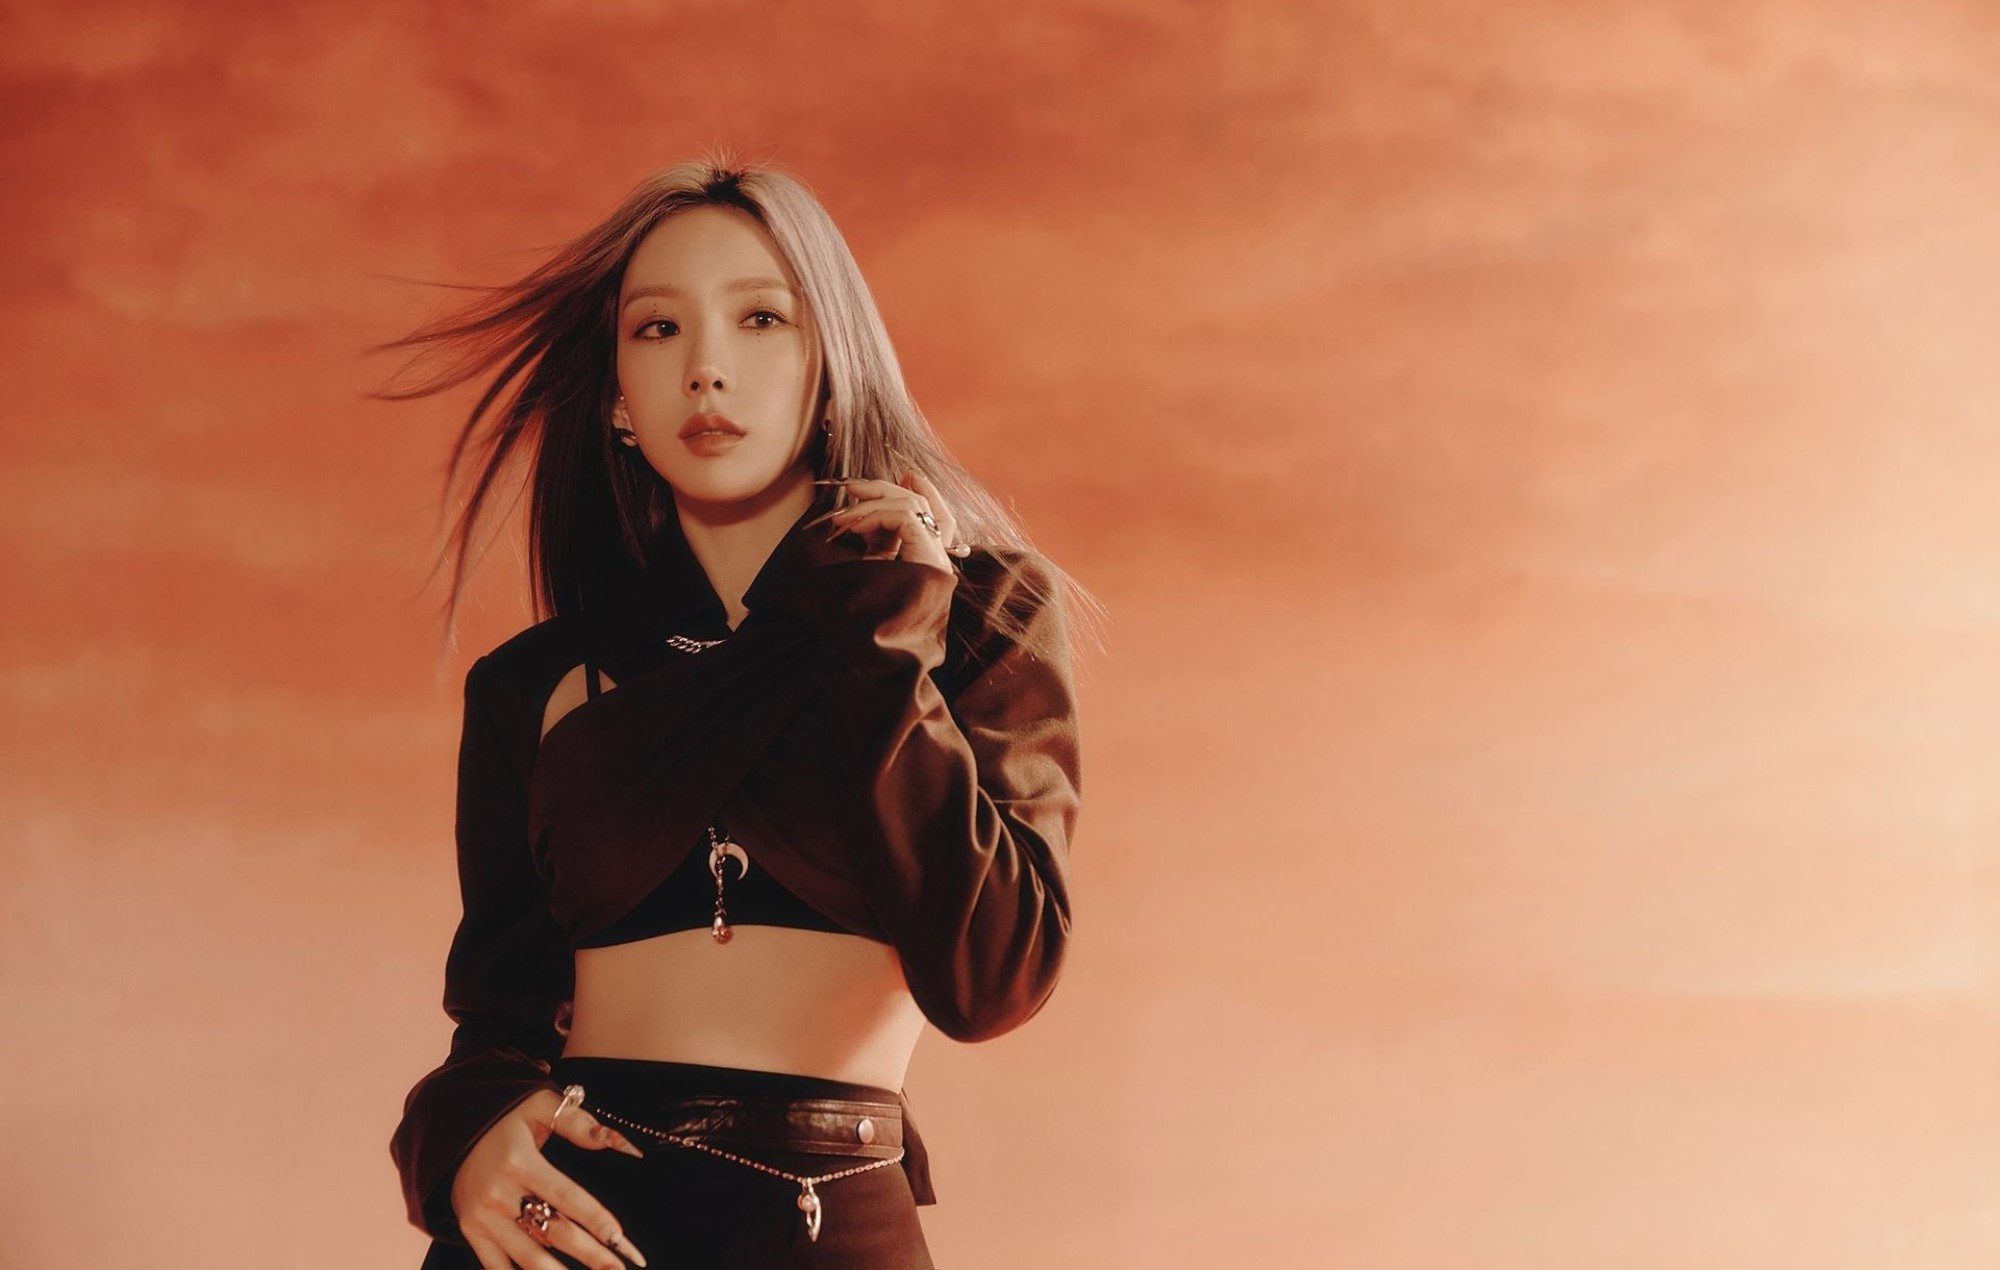 Taeyeon’s Net Worth: How Rich Is the Girls’ Generation Member?